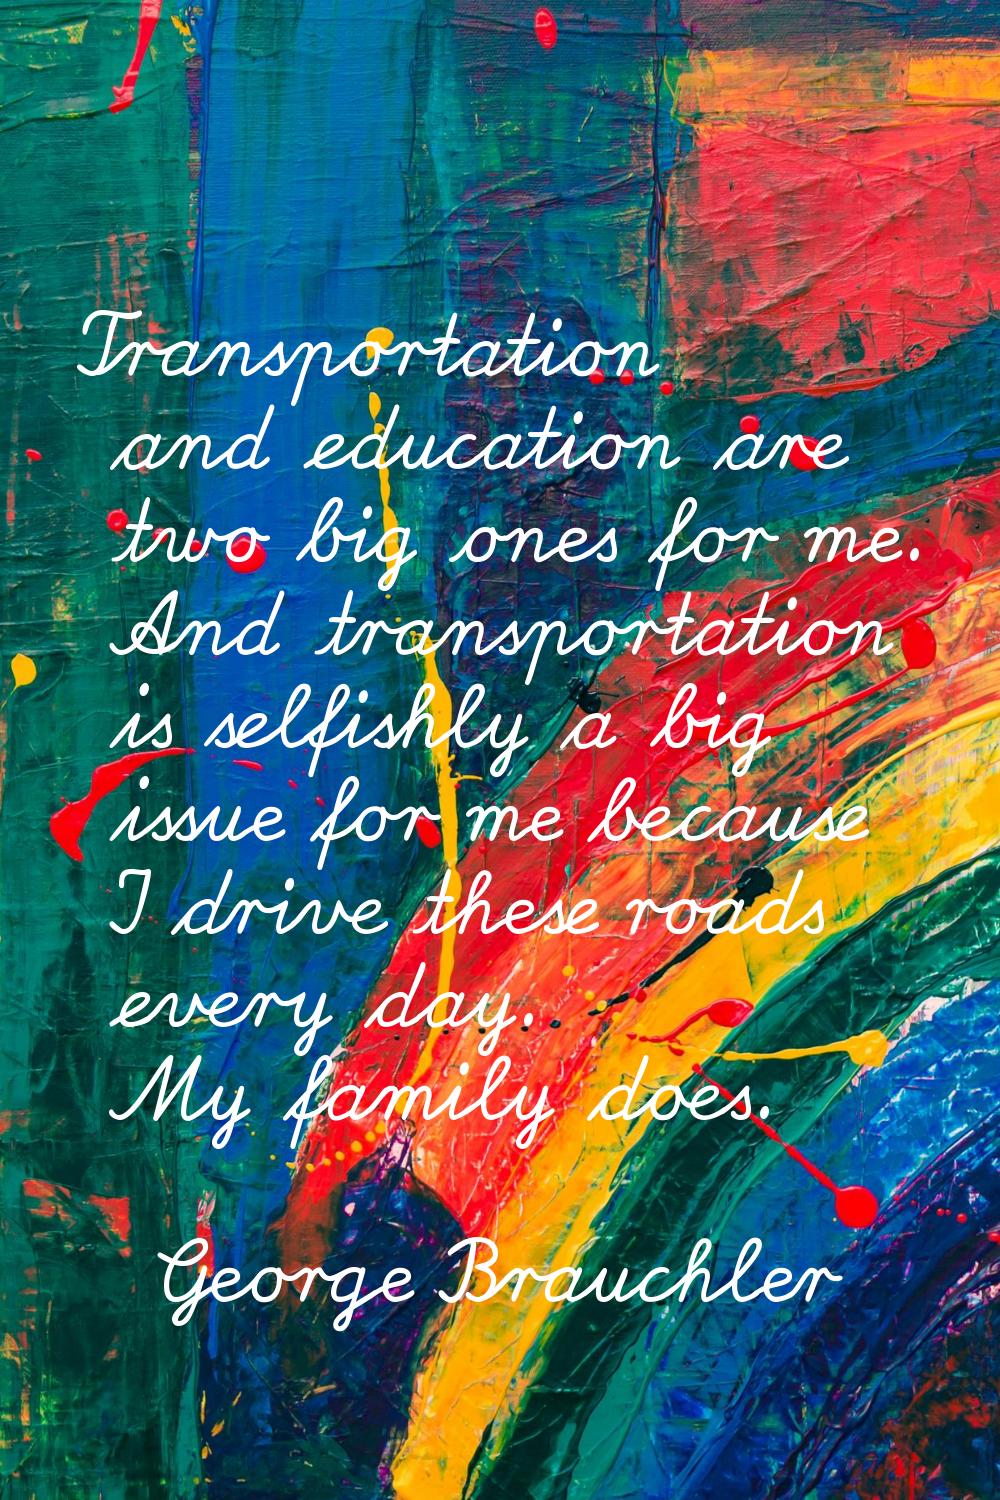 Transportation and education are two big ones for me. And transportation is selfishly a big issue f